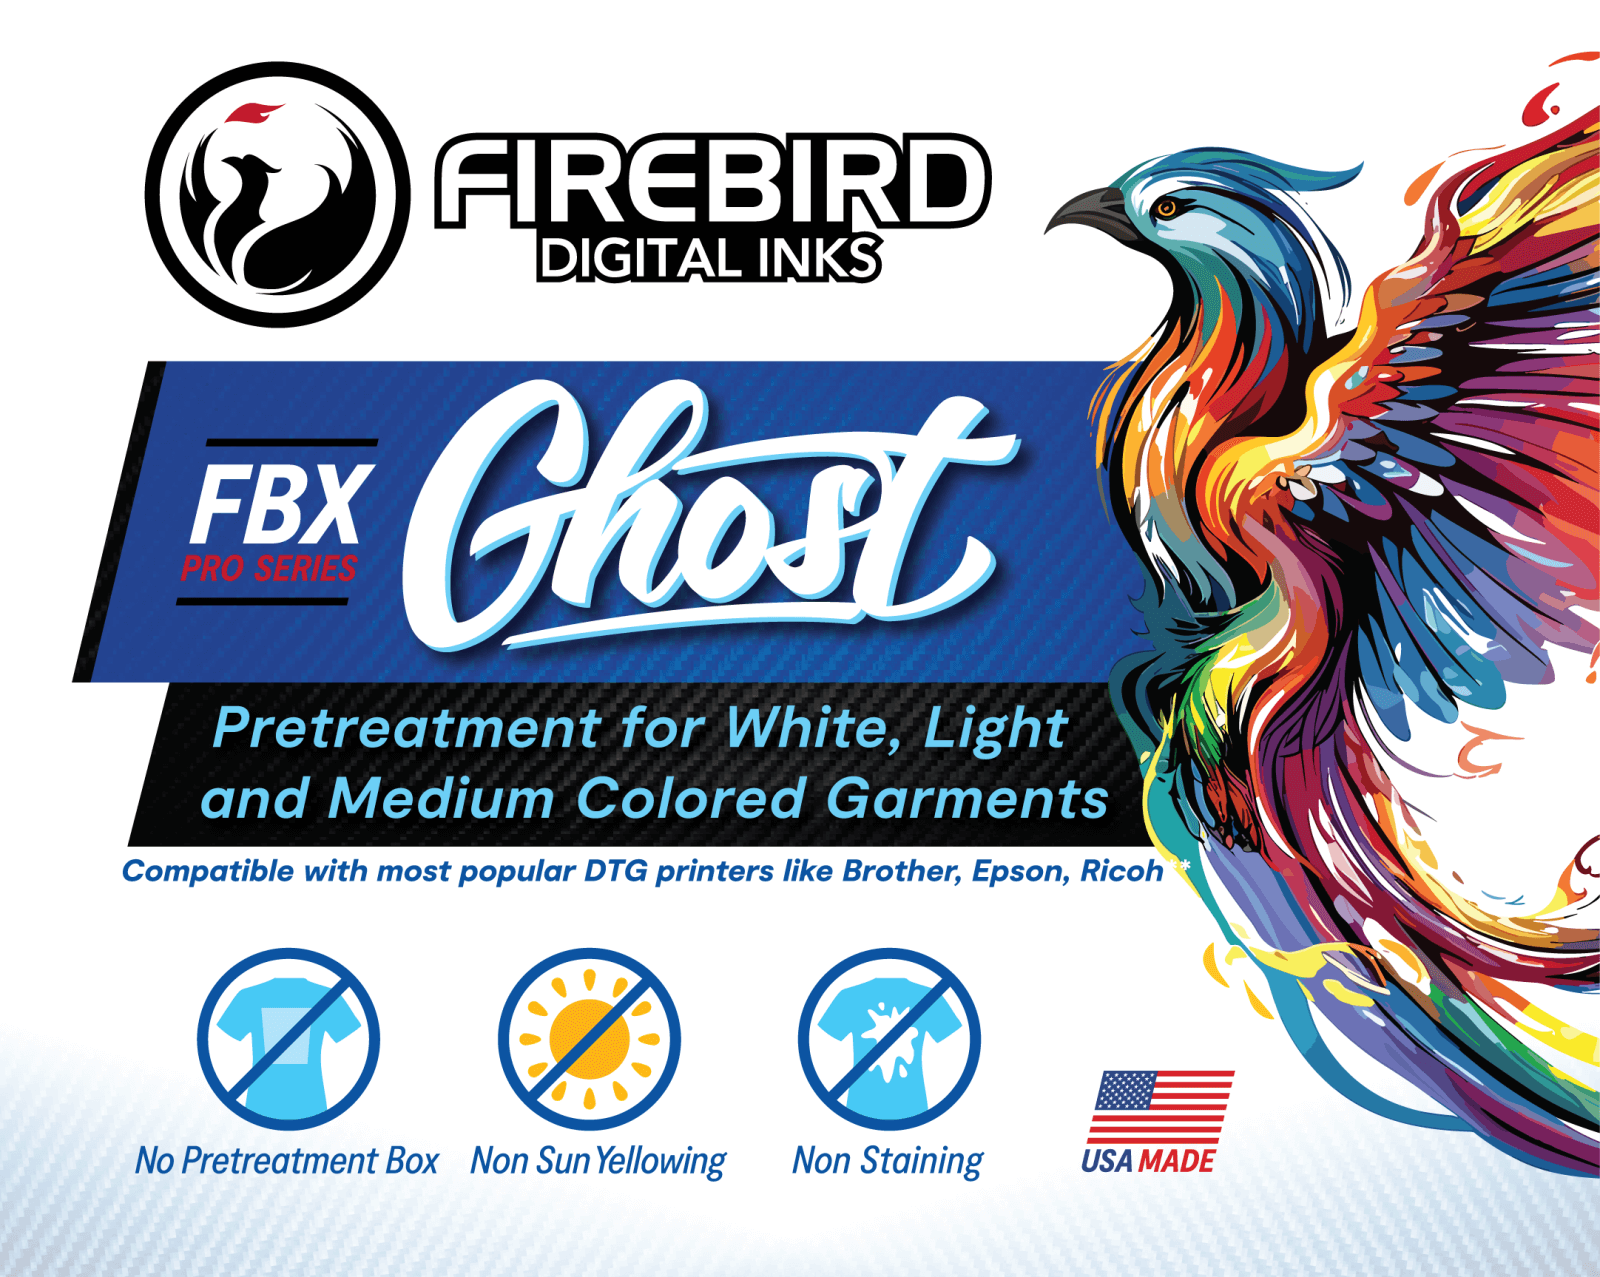 FBX Ghost - Pretreatment for White, Light and Medium Colored Garments - 0